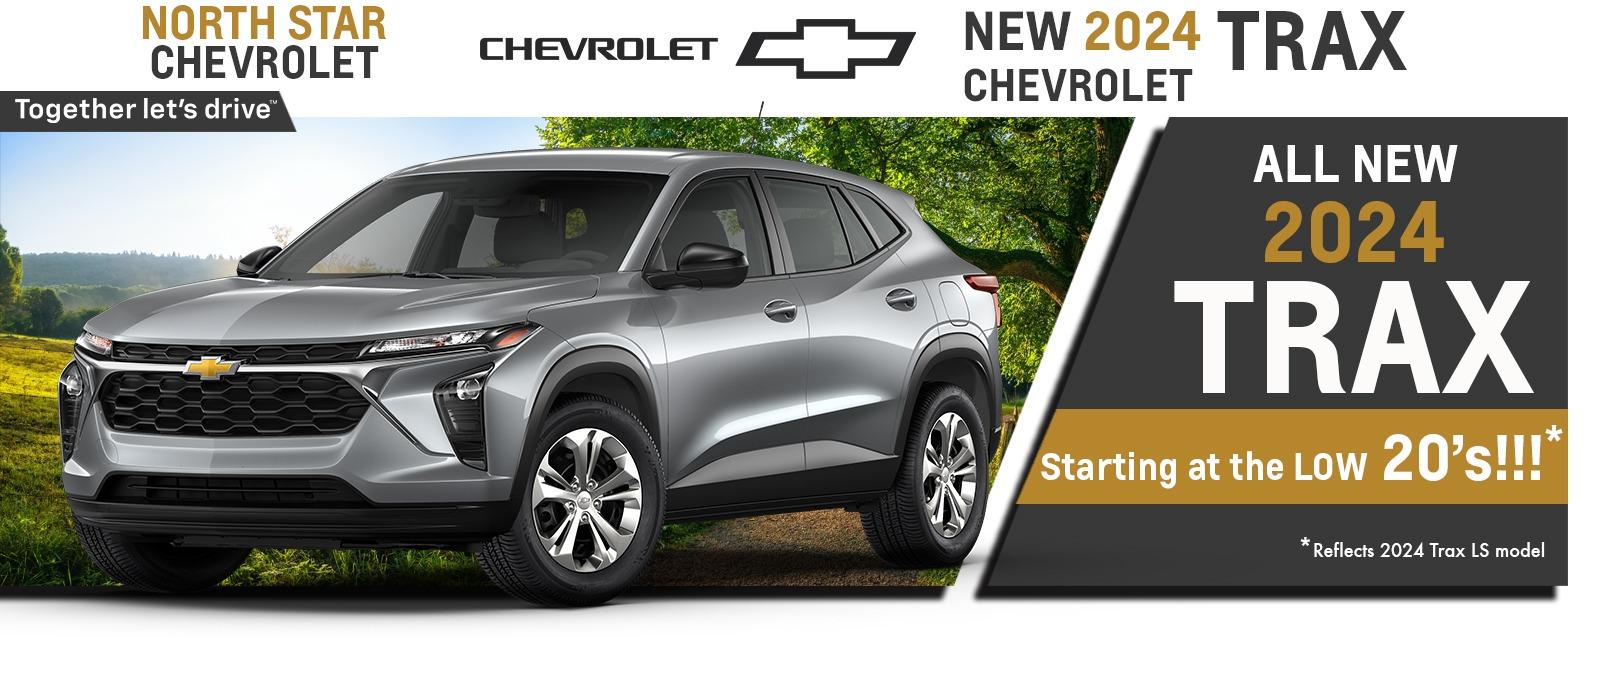 2024 Chevy Trax starting at the low 20's